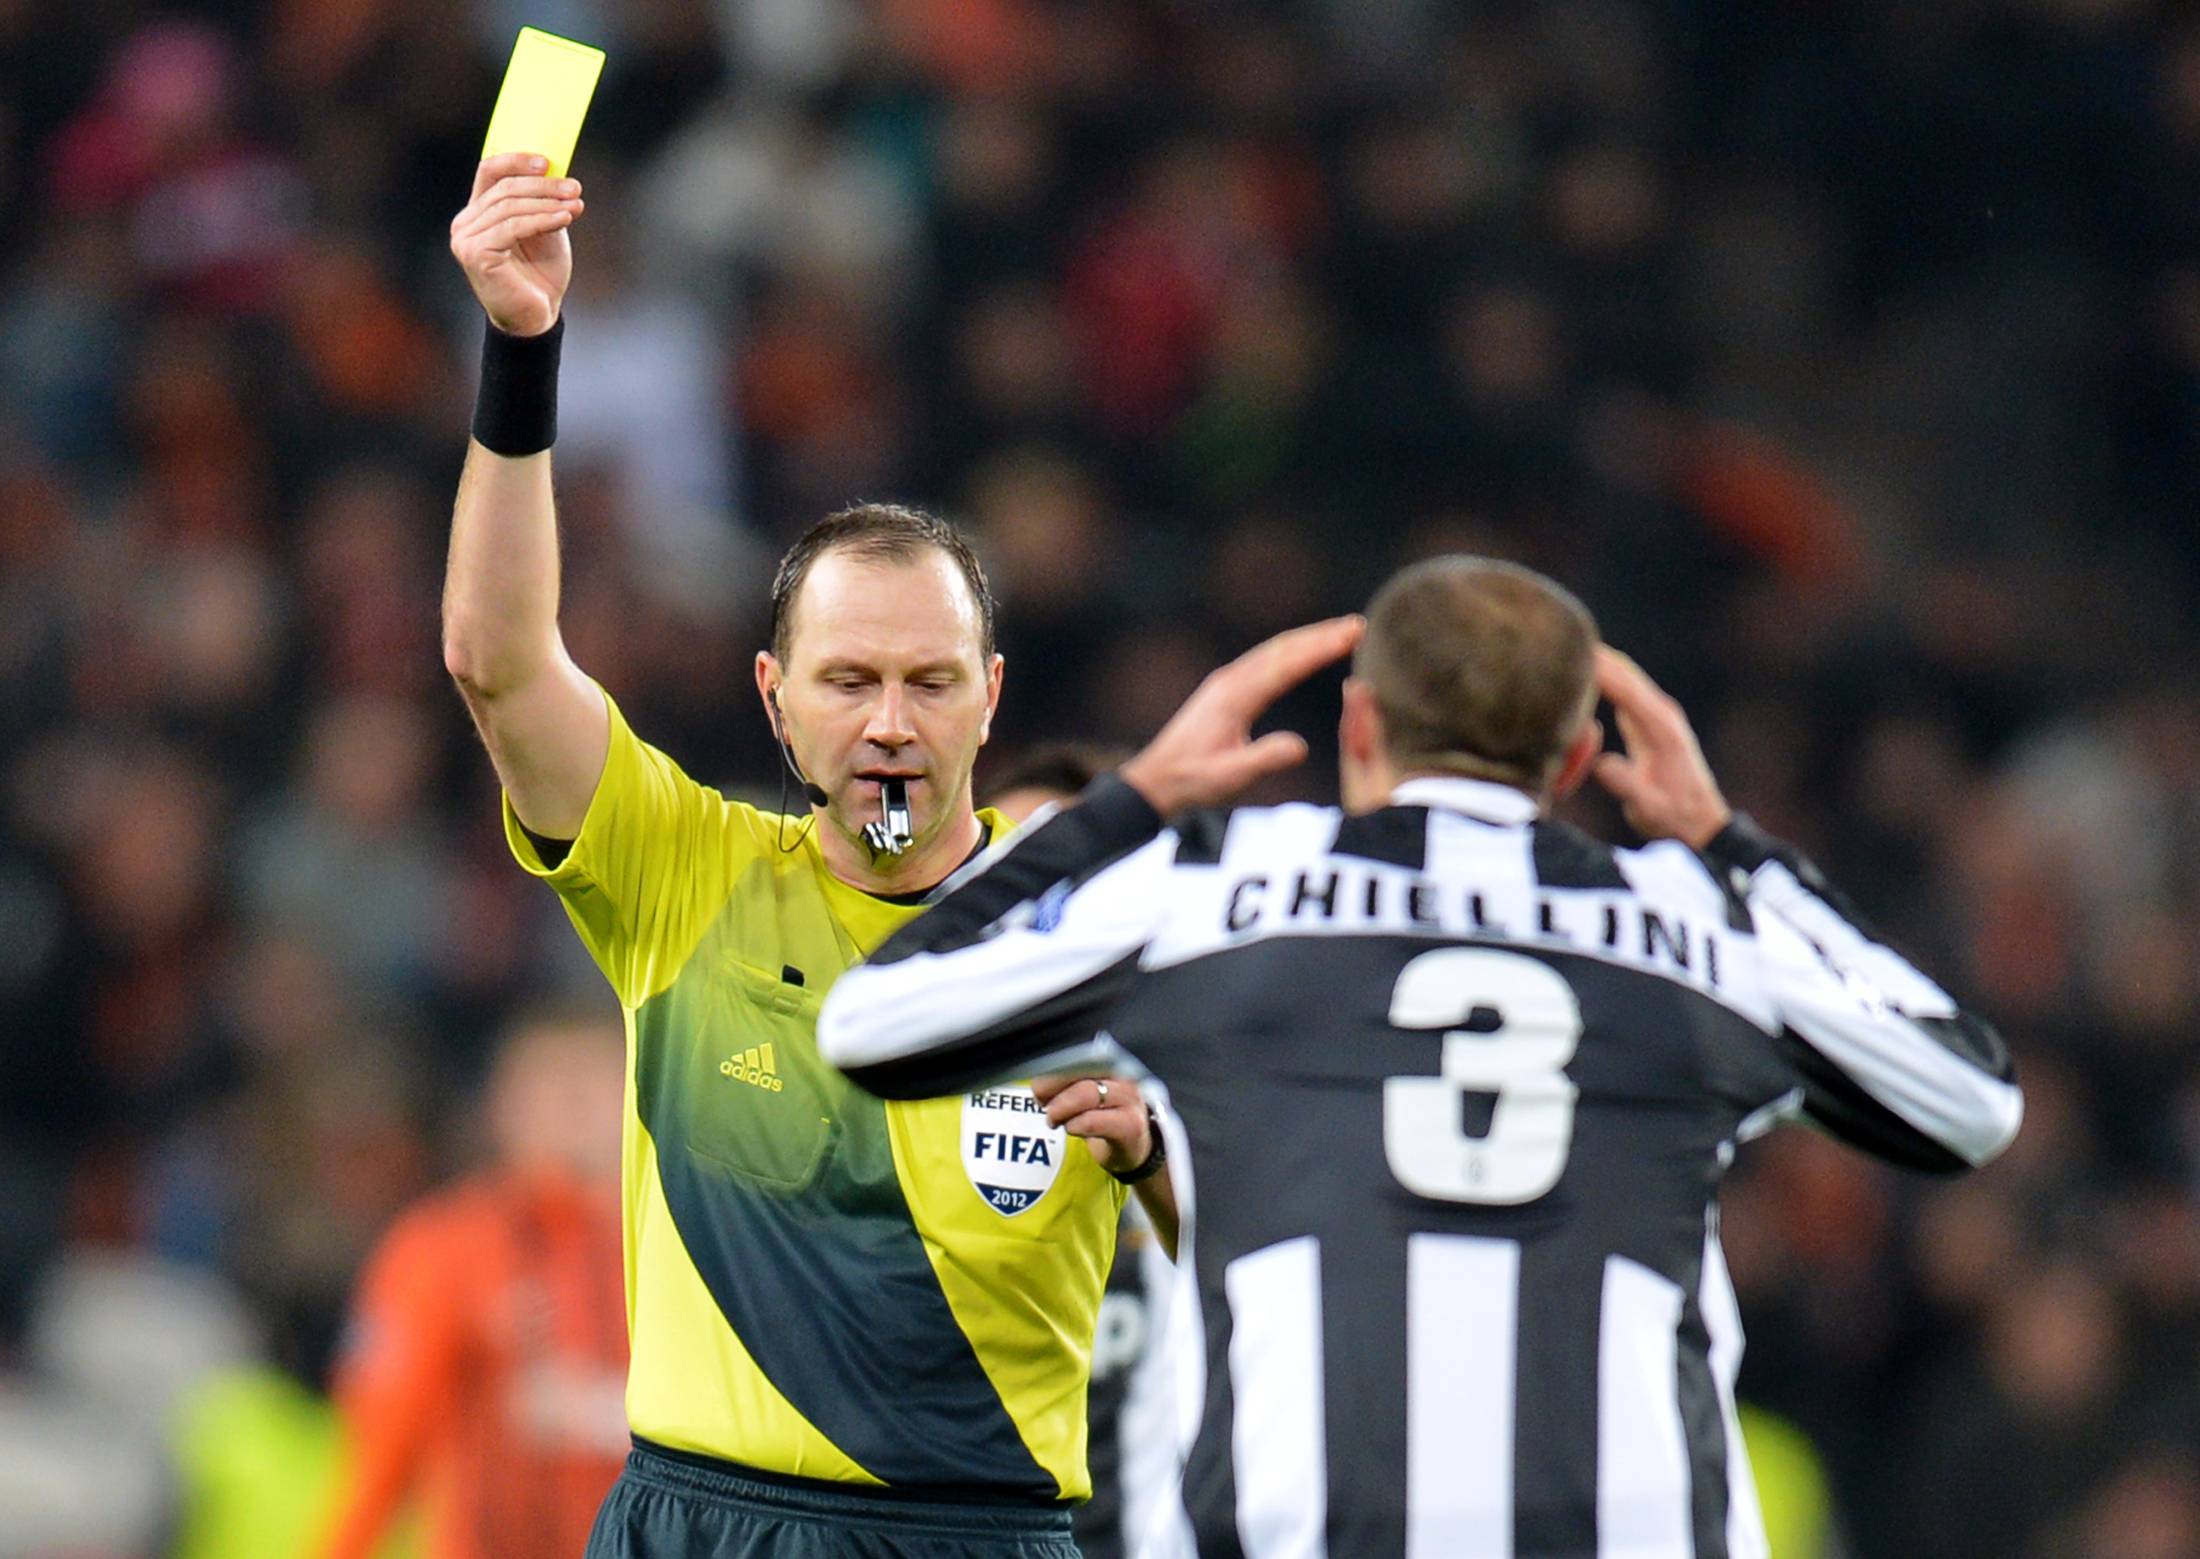 _The_halfback_of_Juventus_Giorgio_Chiellini_gets_a_yellow_card_050286_